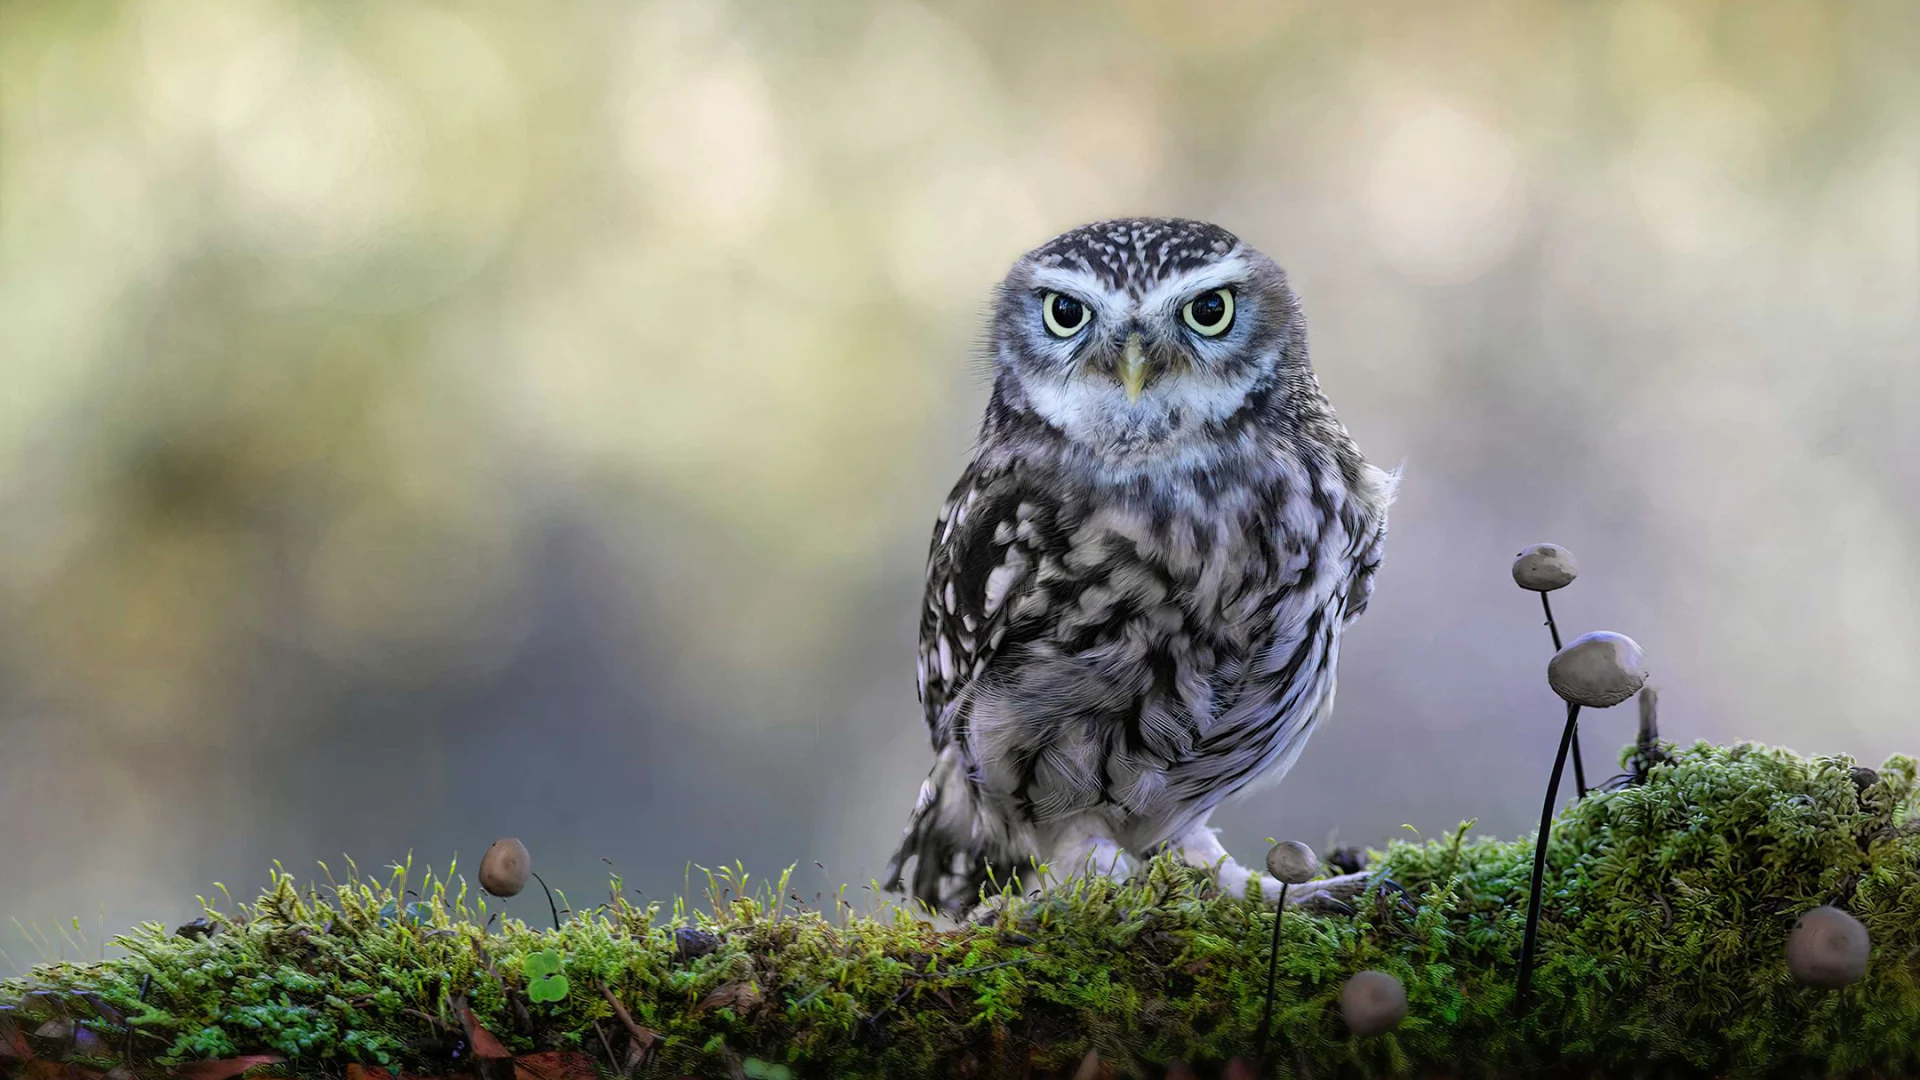 Little owl at the edge of the forest